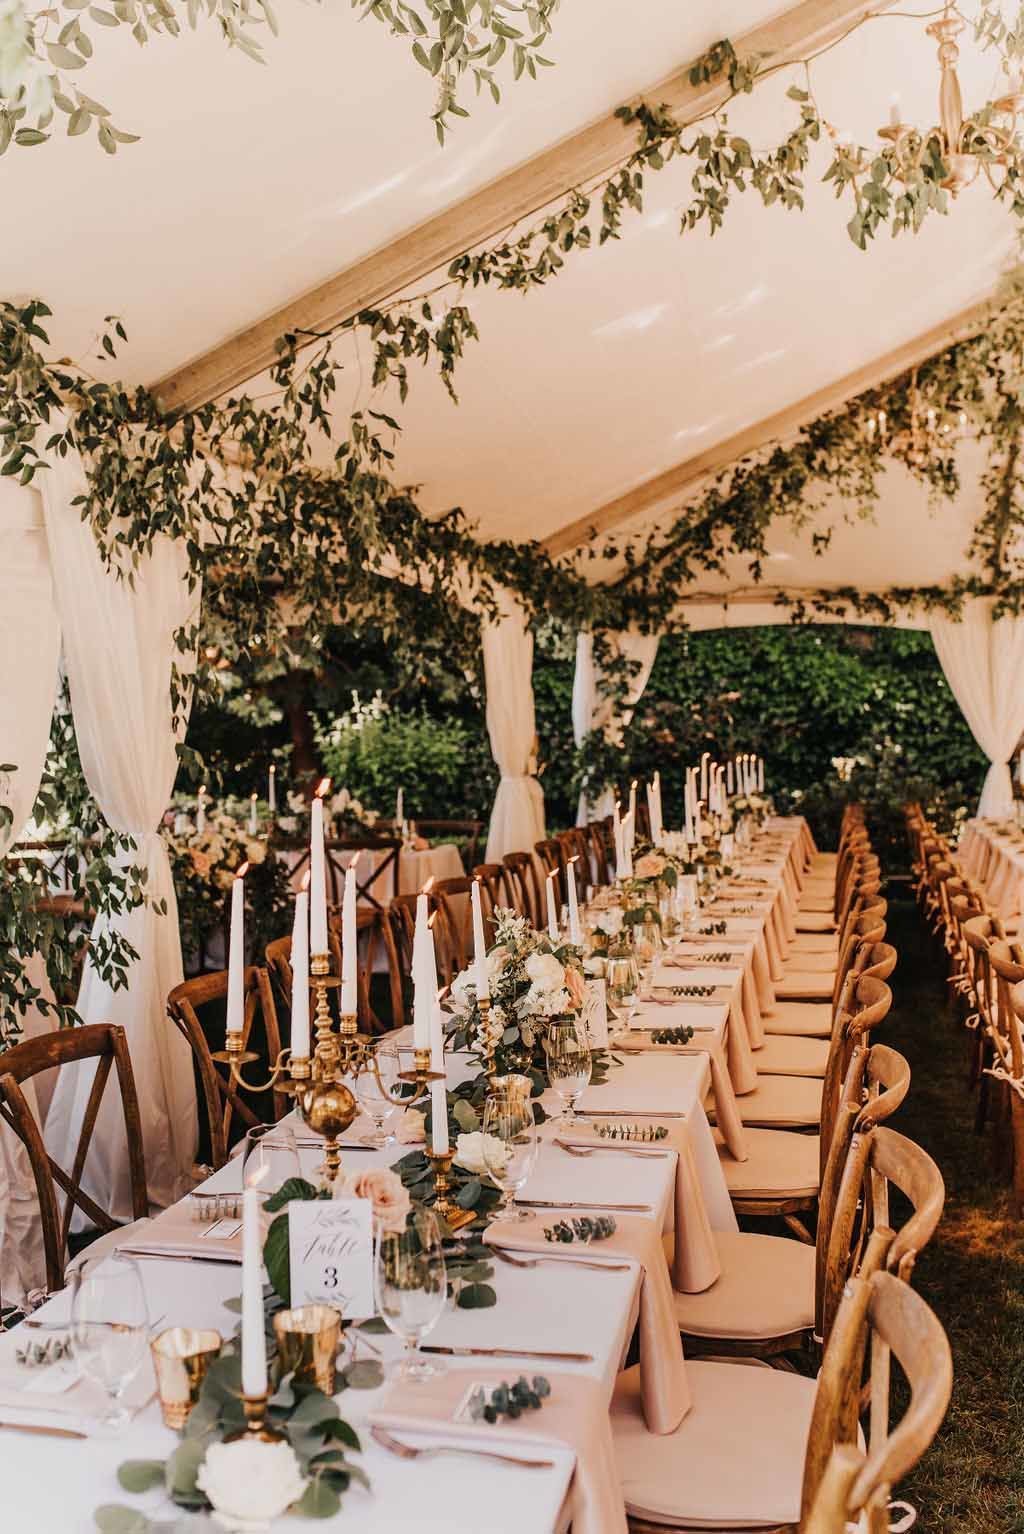 long wedding reception table lined with taper candles, greenery garland runner, and flower blooms, vineyard chairs